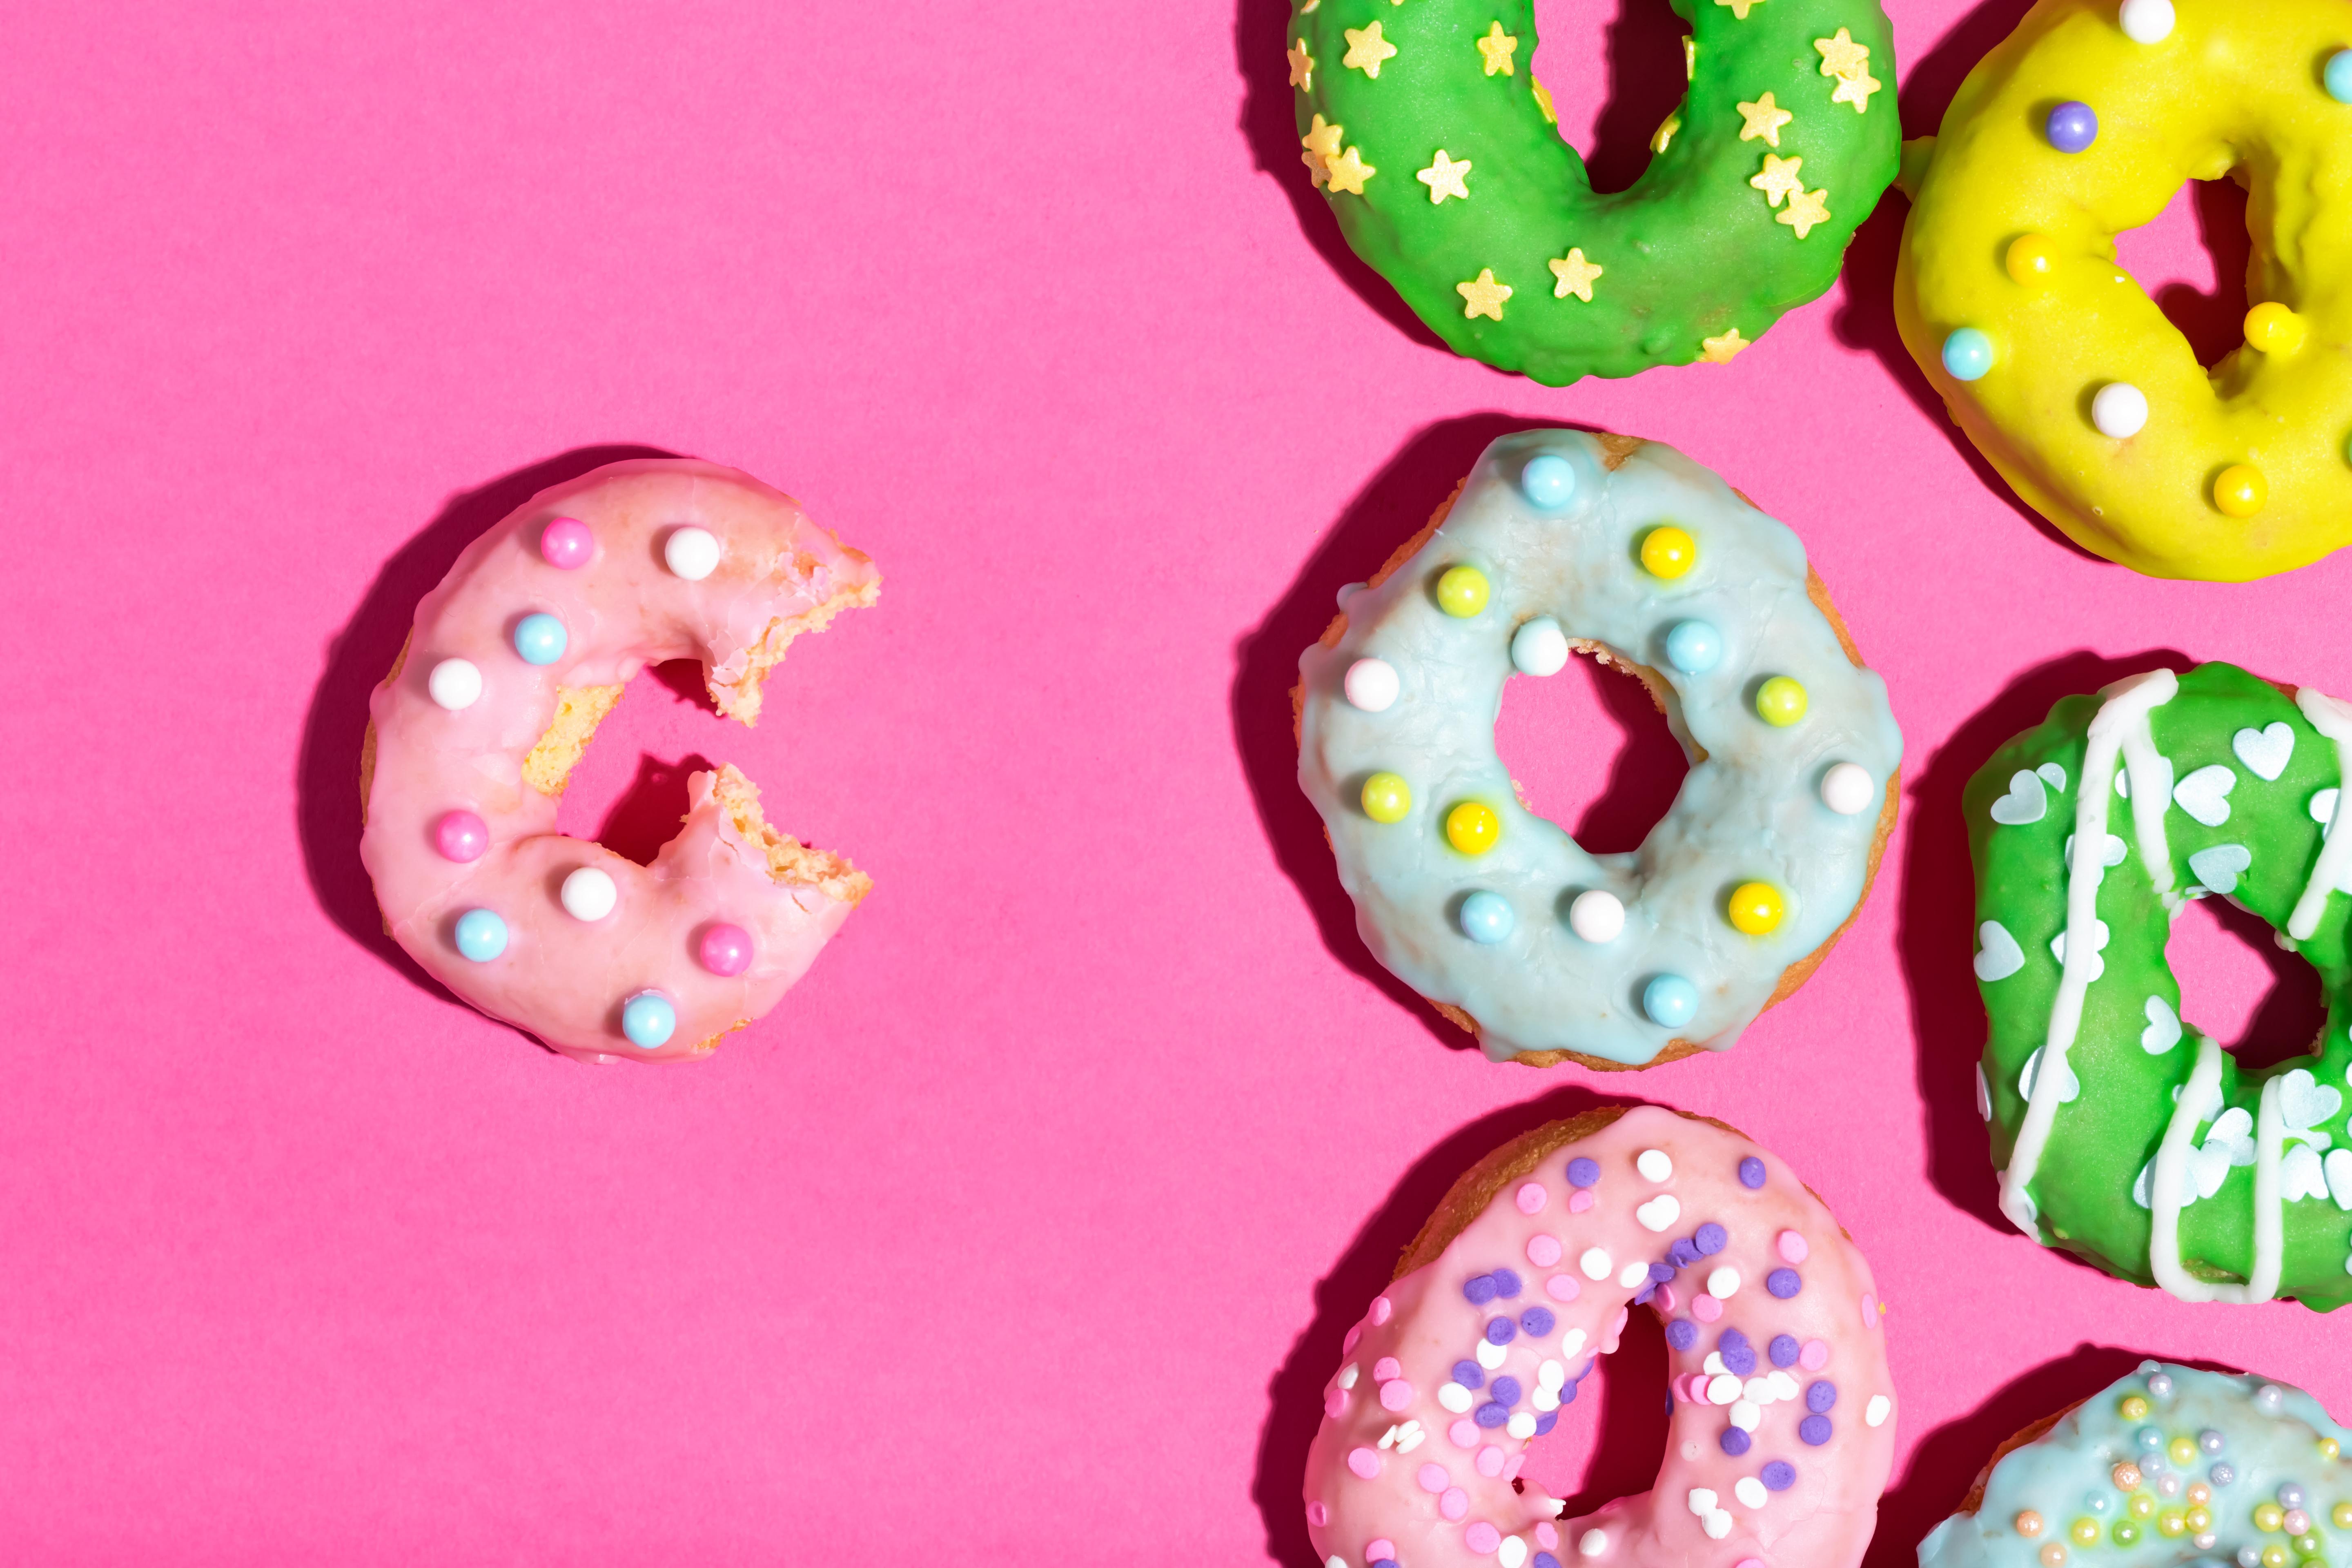 Colorful sprinkled donuts on a pink background